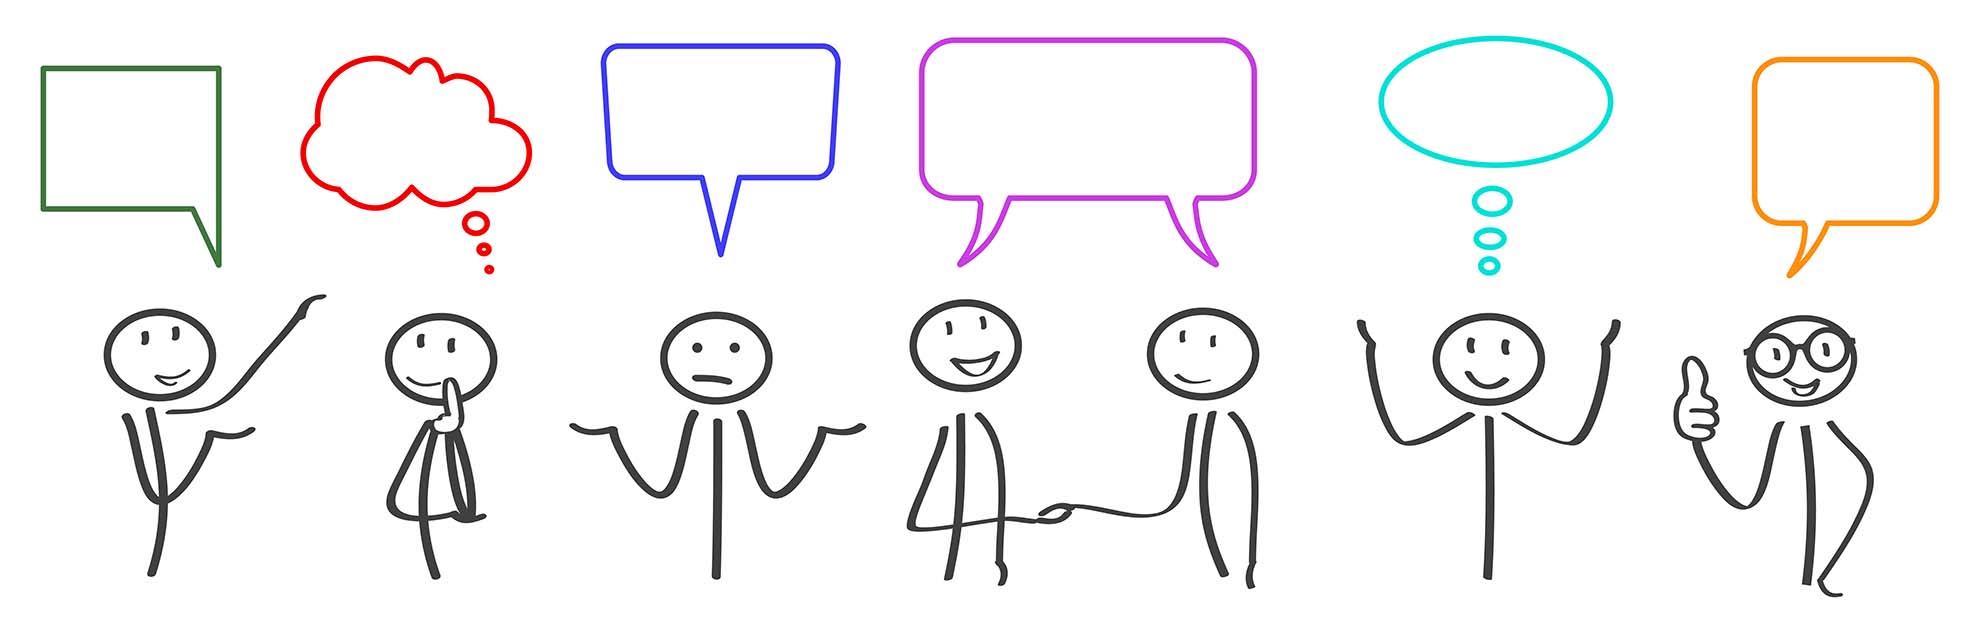 Stick people saying things without any text